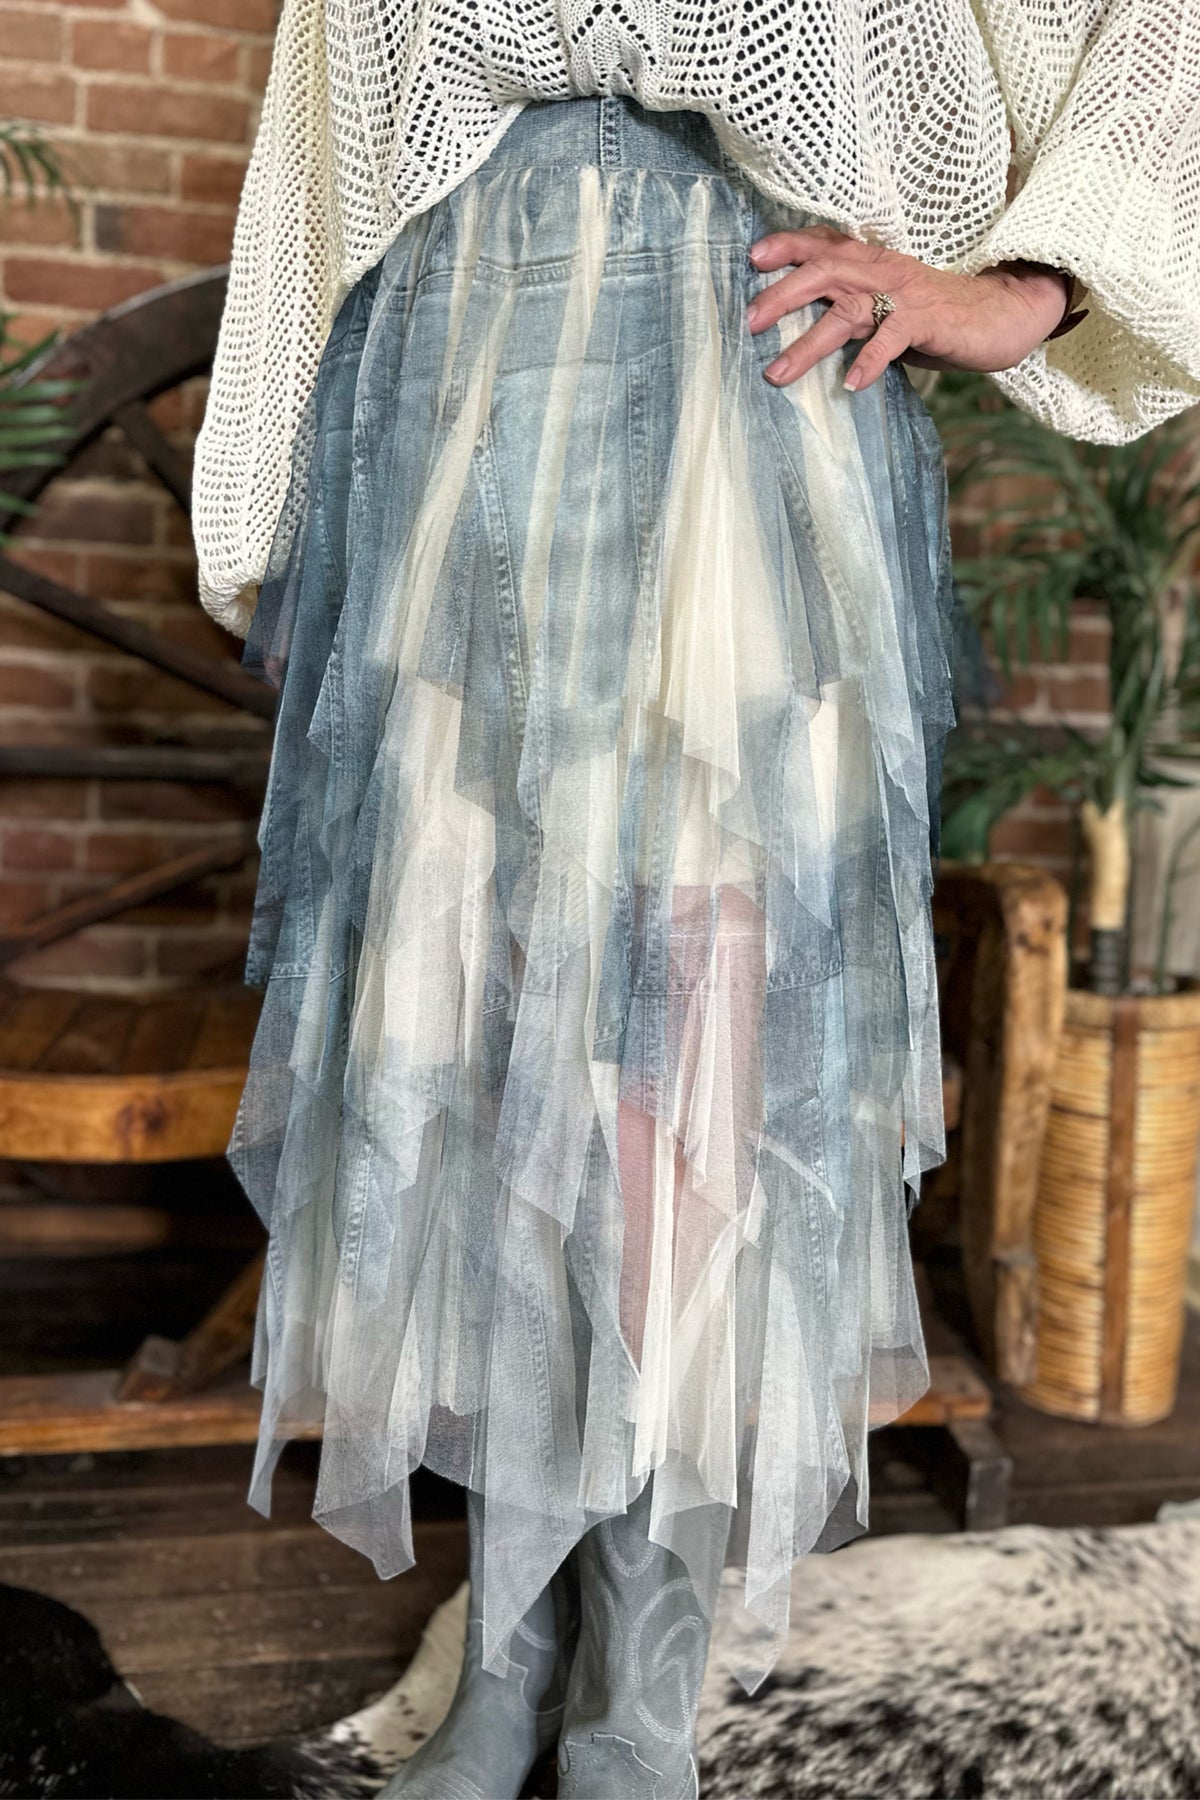 Layered Denim 'N Lace Inspired Mesh Skirt by Origami Apparel-Skirt-Origami-Gallop 'n Glitz- Women's Western Wear Boutique, Located in Grants Pass, Oregon